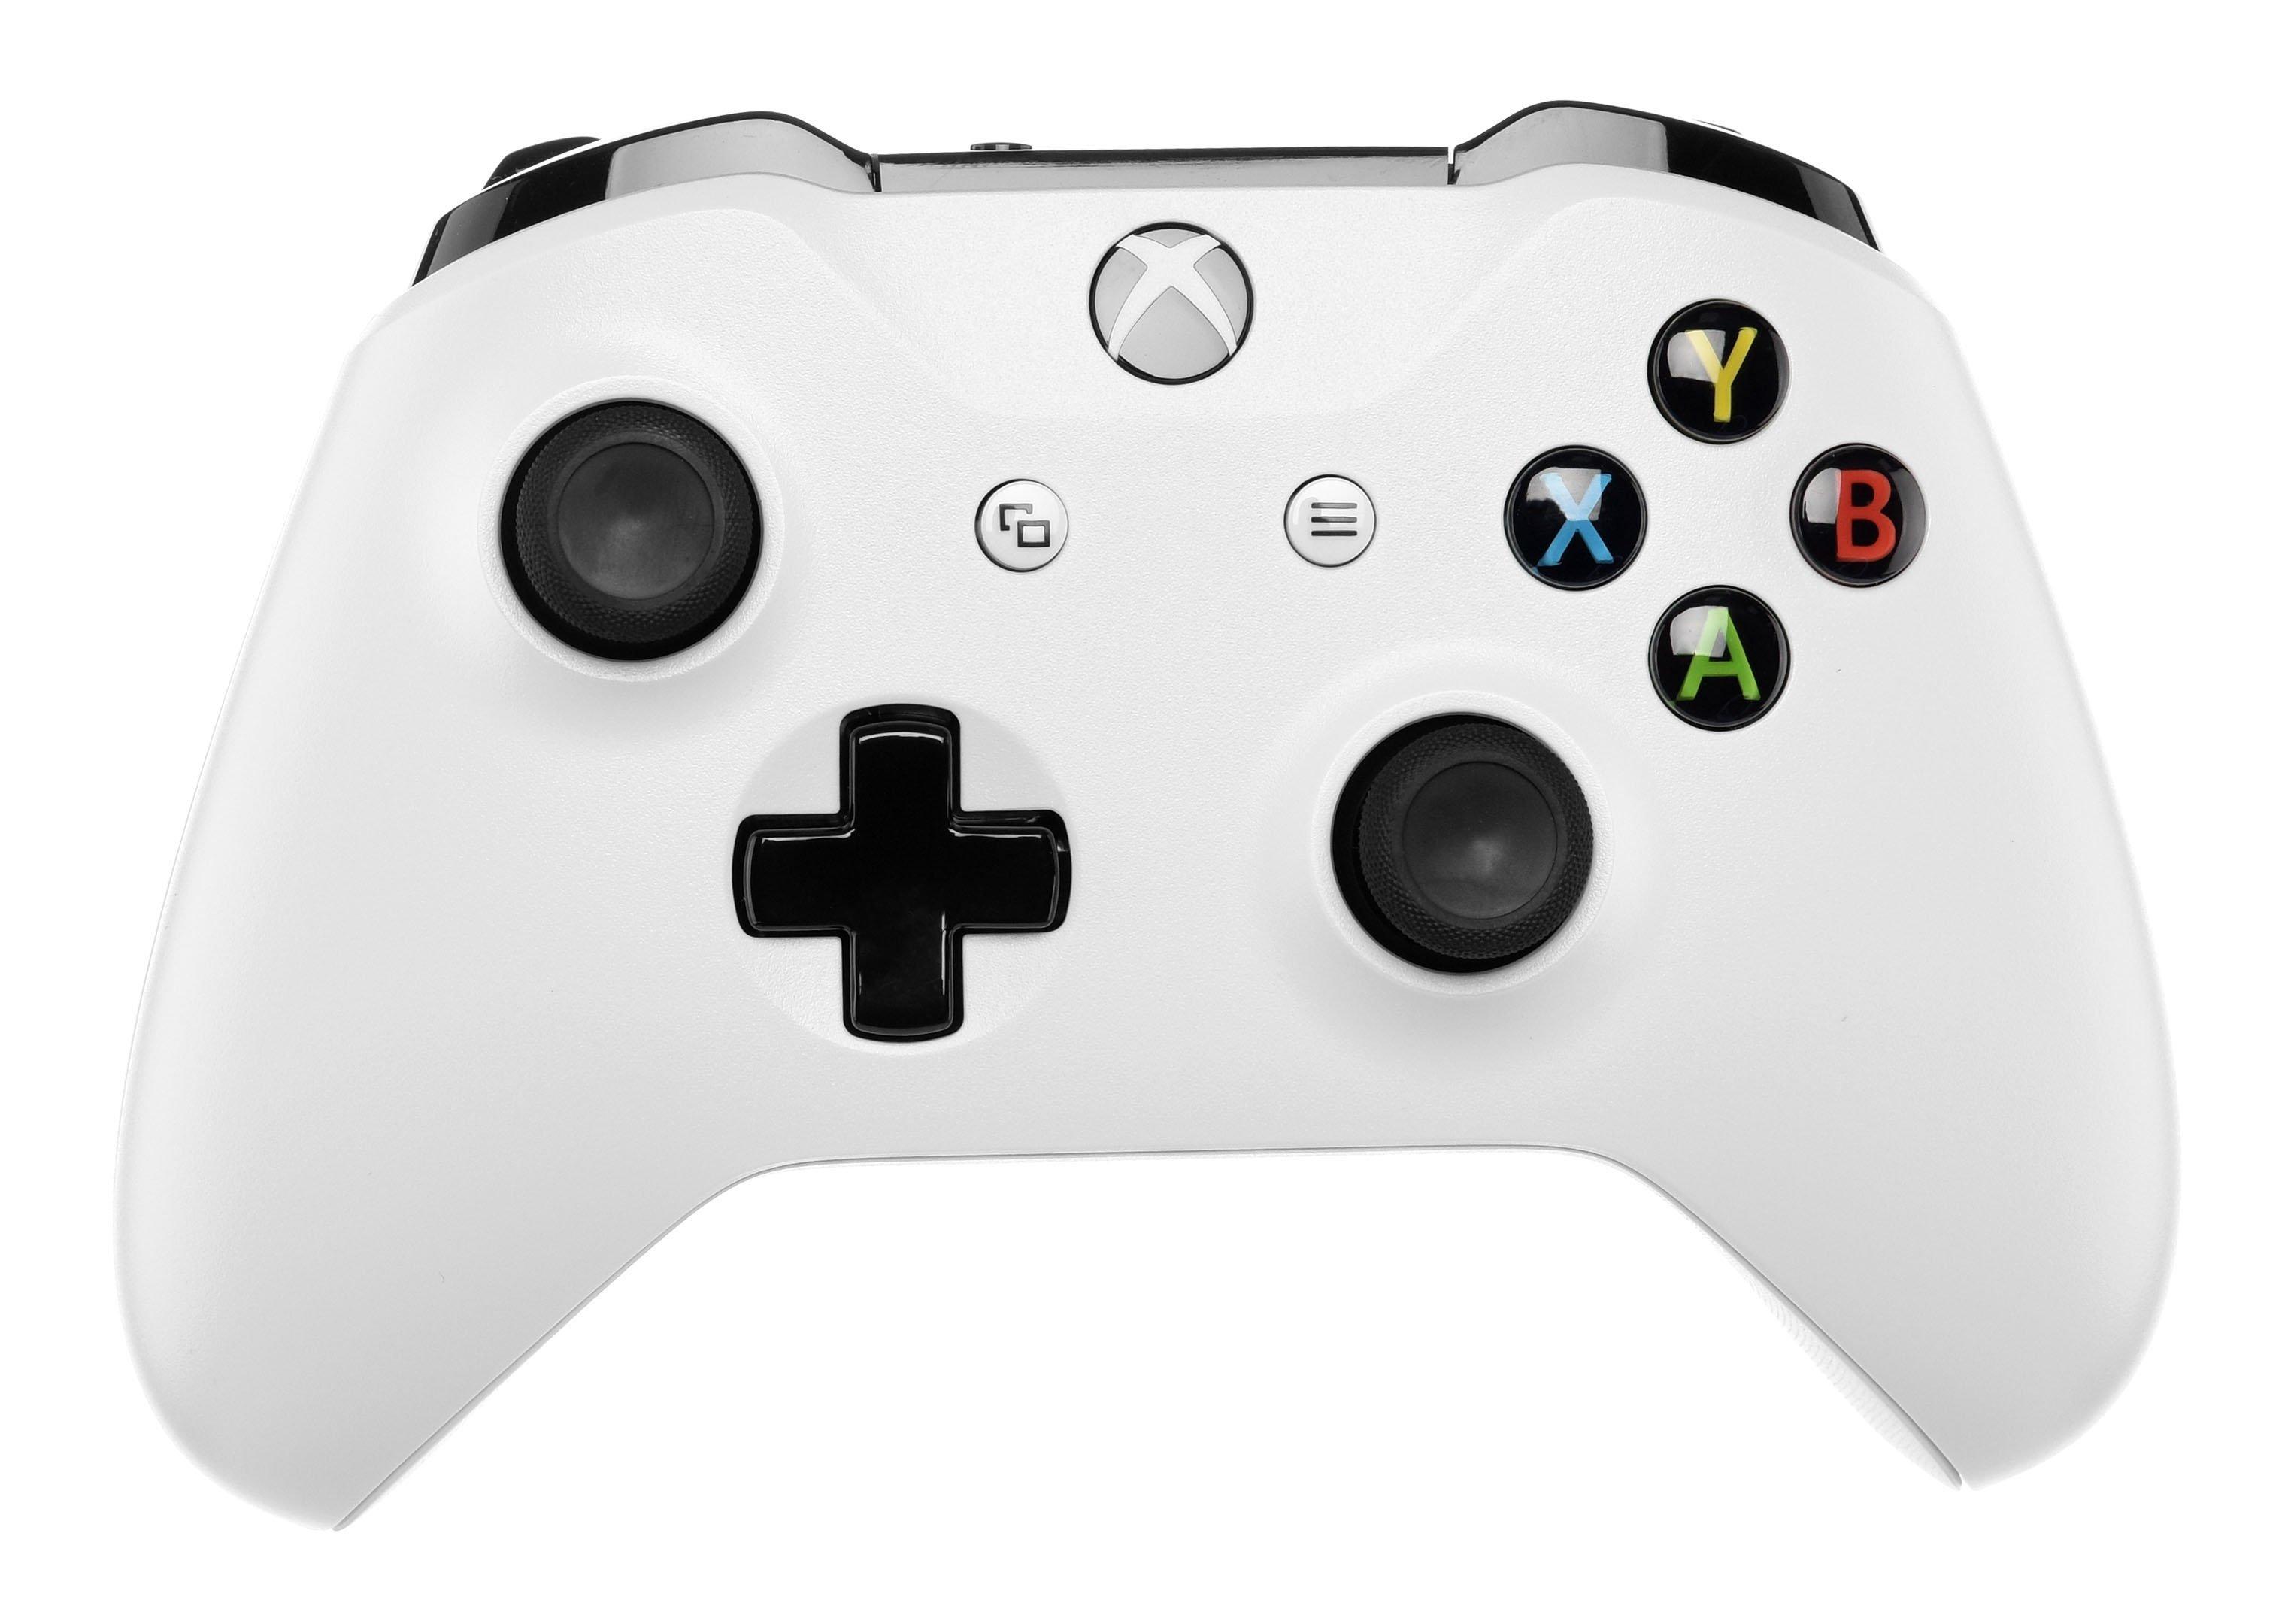 xbox one s controller cheapest price